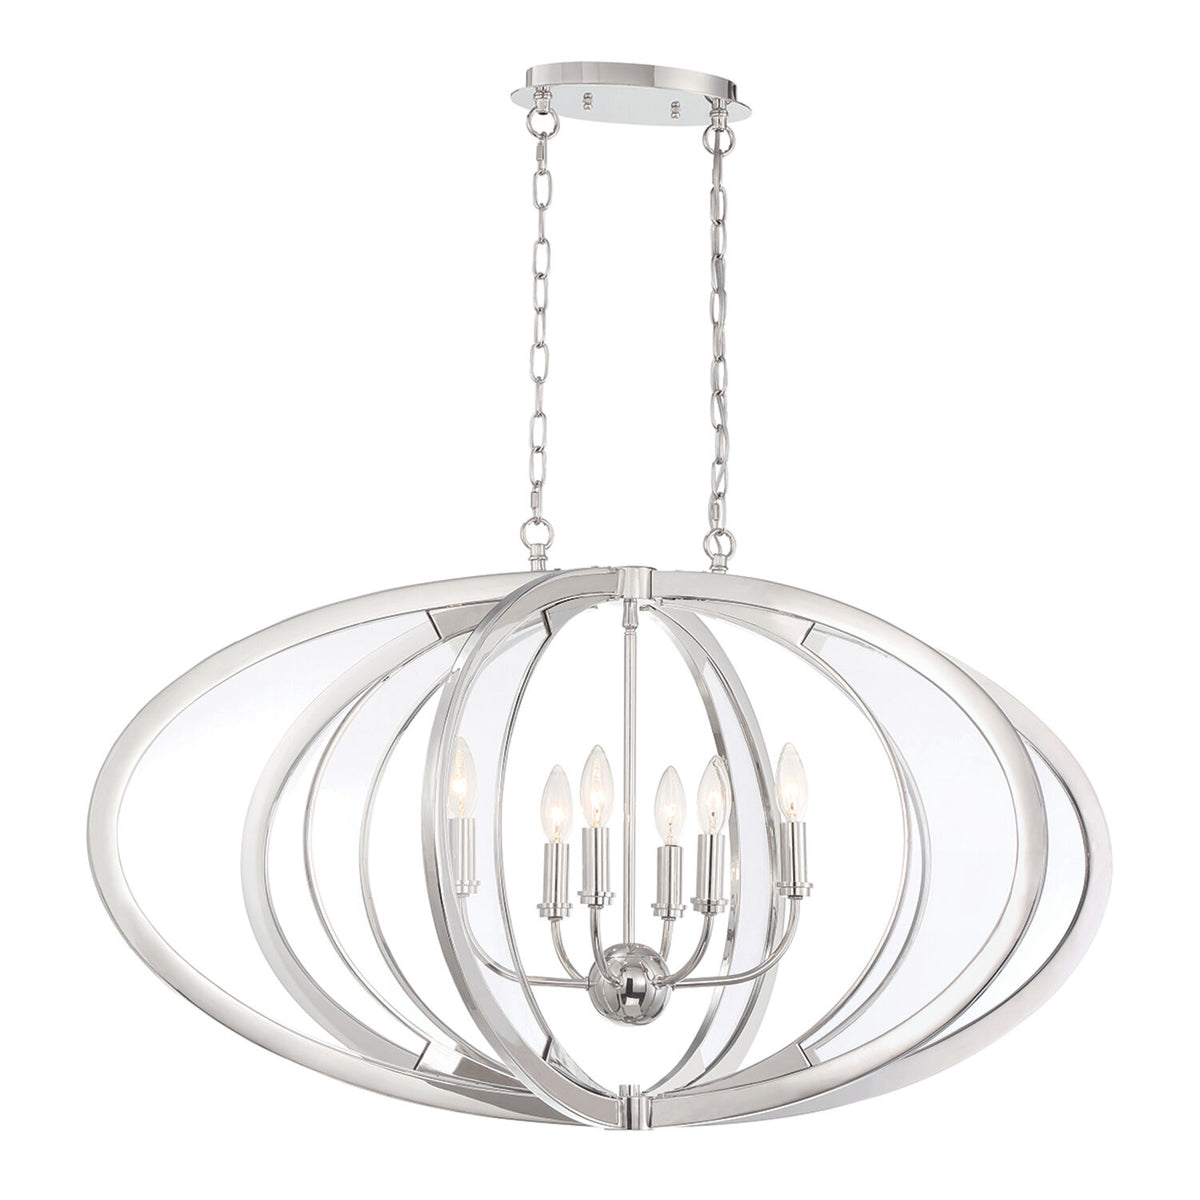 AMHERST 40-INCH OVAL CHANDELIER, 33708